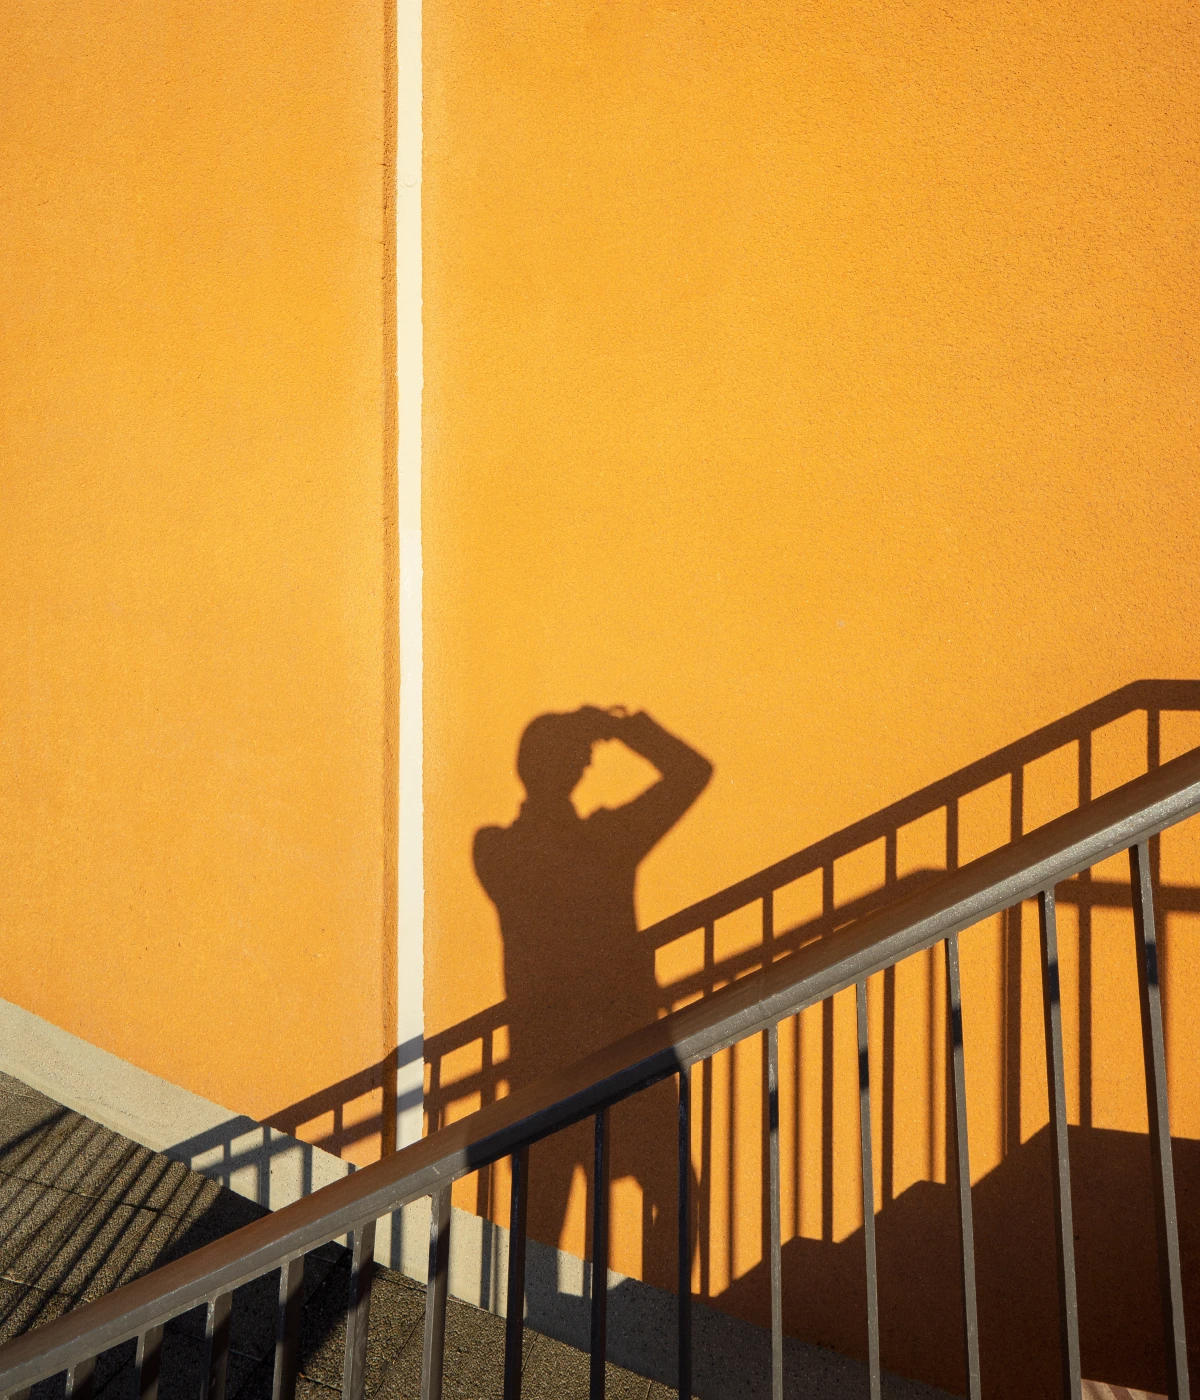 Shadow of a person on a yellow wall.